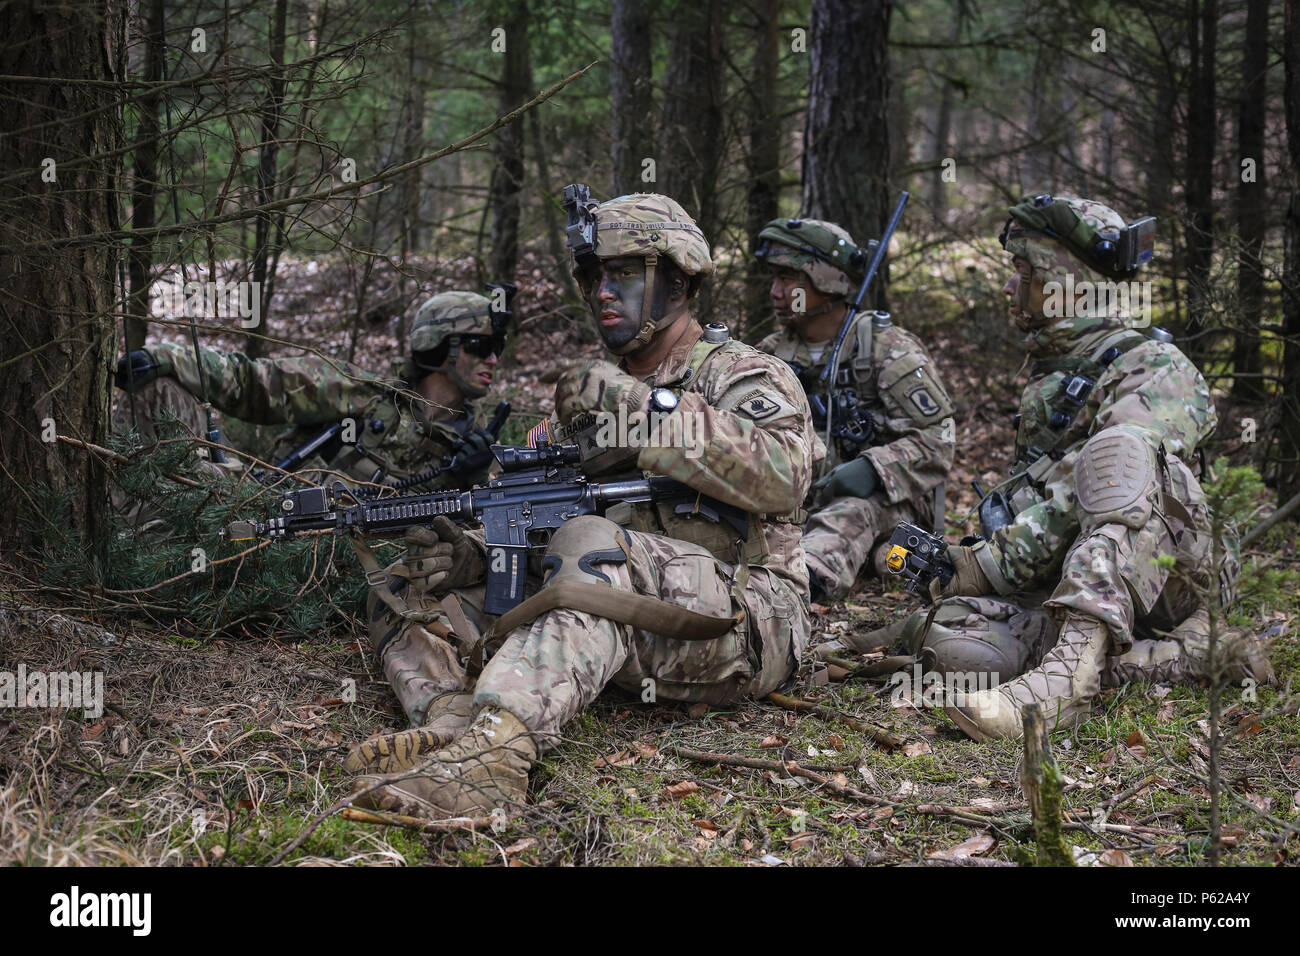 U.S. Soldiers of Able Company, 2nd Battalion, 503rd Infantry Regiment, 173rd Airborne Brigade conduct a tactical pause during a counter reconnaissance offensive operational scenario during exercise Saber Junction 16 at the U.S. Army’s Joint Multinational Readiness Center (JMRC) in Hohenfels, Germany, April 14, 2016. Saber Junction 16 is the U.S. Army Europe’s 173rd Airborne Brigade’s combat training center certification exercise, taking place at the JMRC in Hohenfels, Germany, Mar. 31-Apr. 24, 2016.  The exercise is designed to evaluate the readiness of the Army’s Europe-based combat brigades  Stock Photo